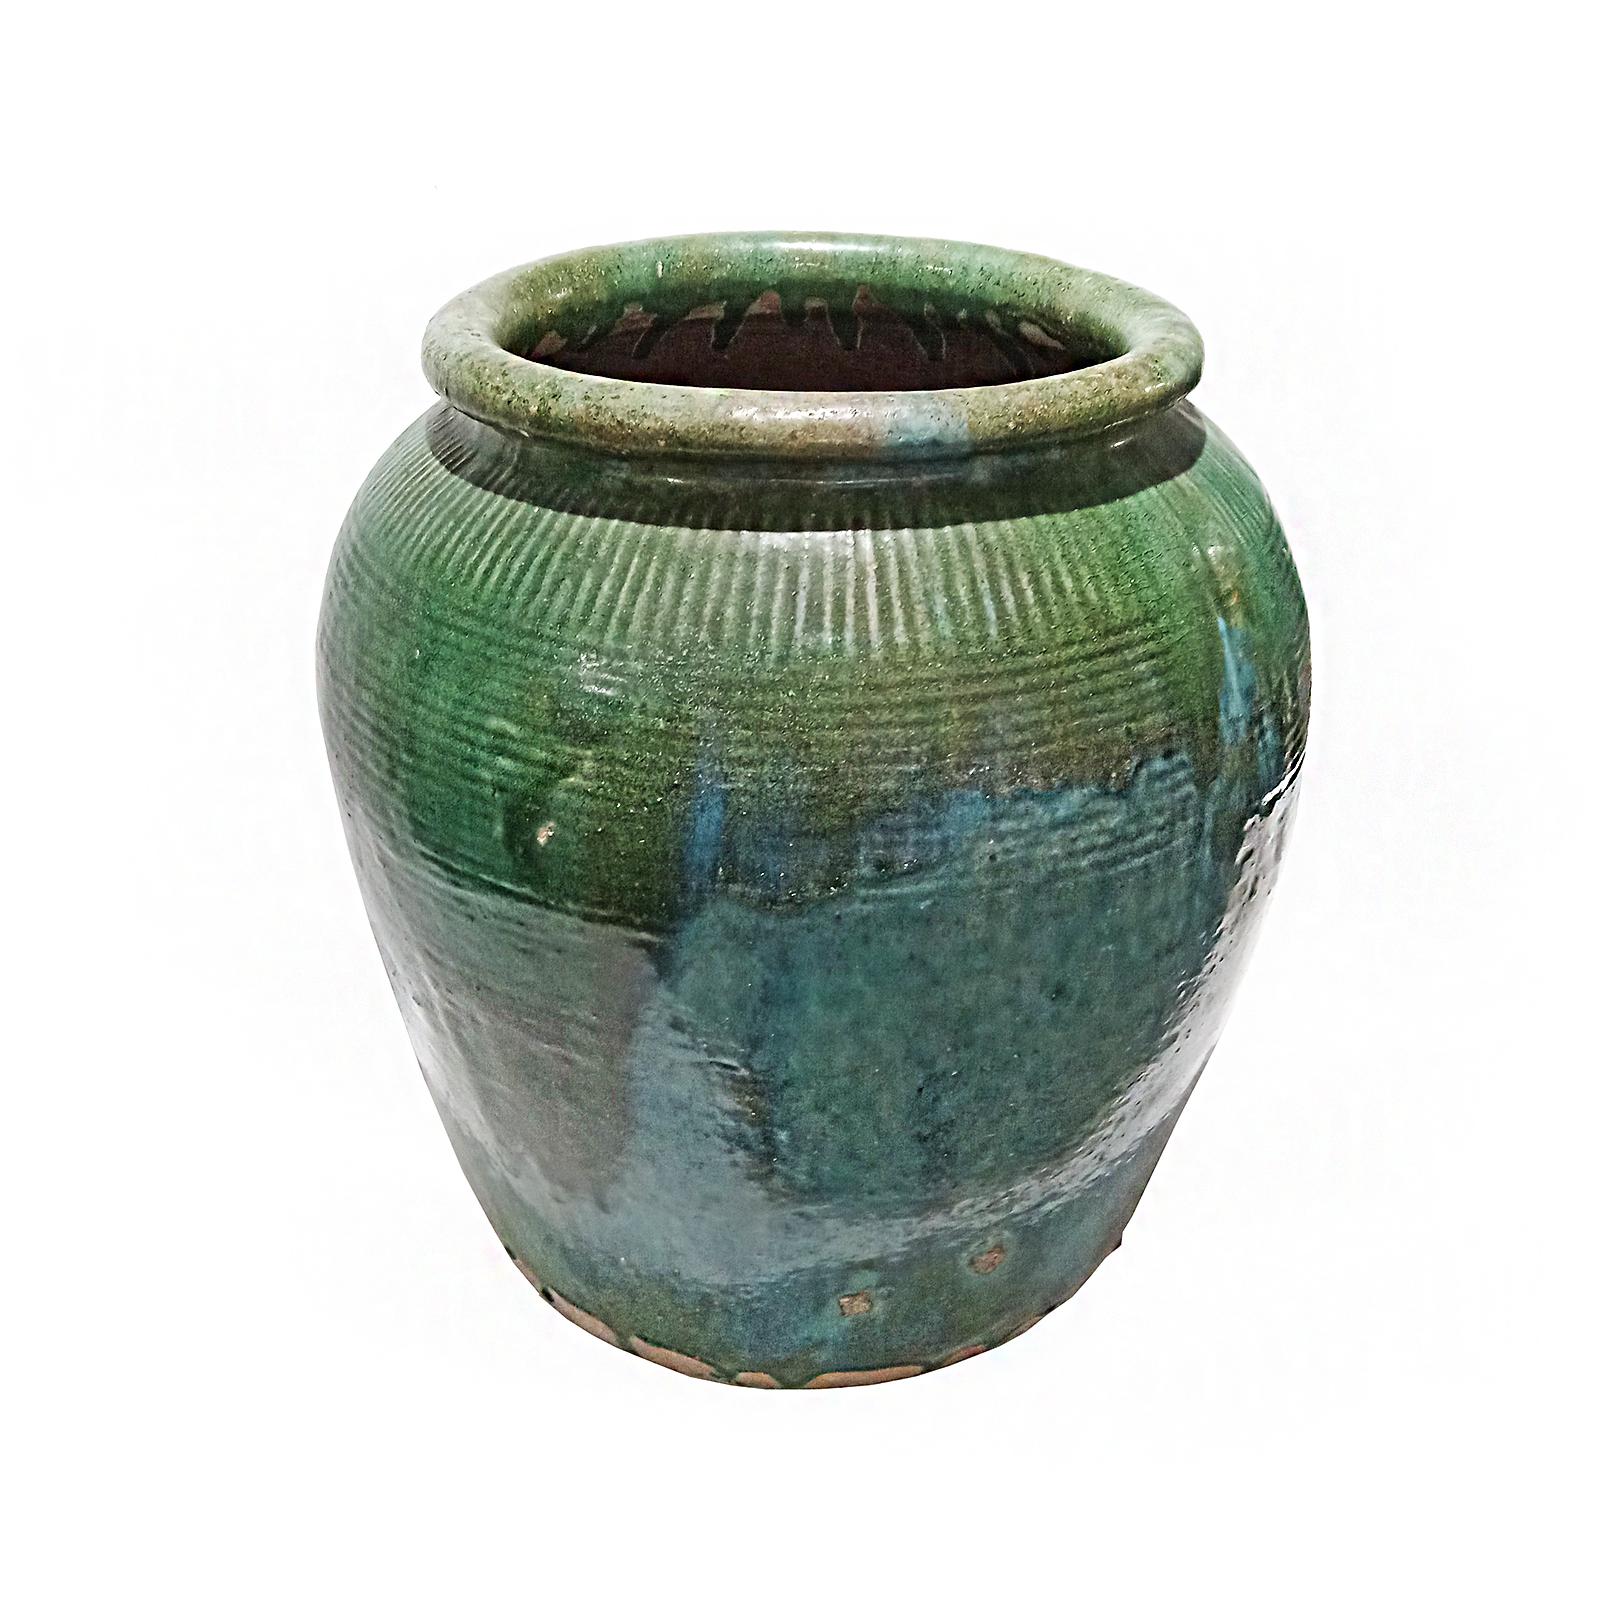 Balinese Terracotta Vase / Jar / Urn with Green Glaze, Contemporary In Good Condition For Sale In New York, NY